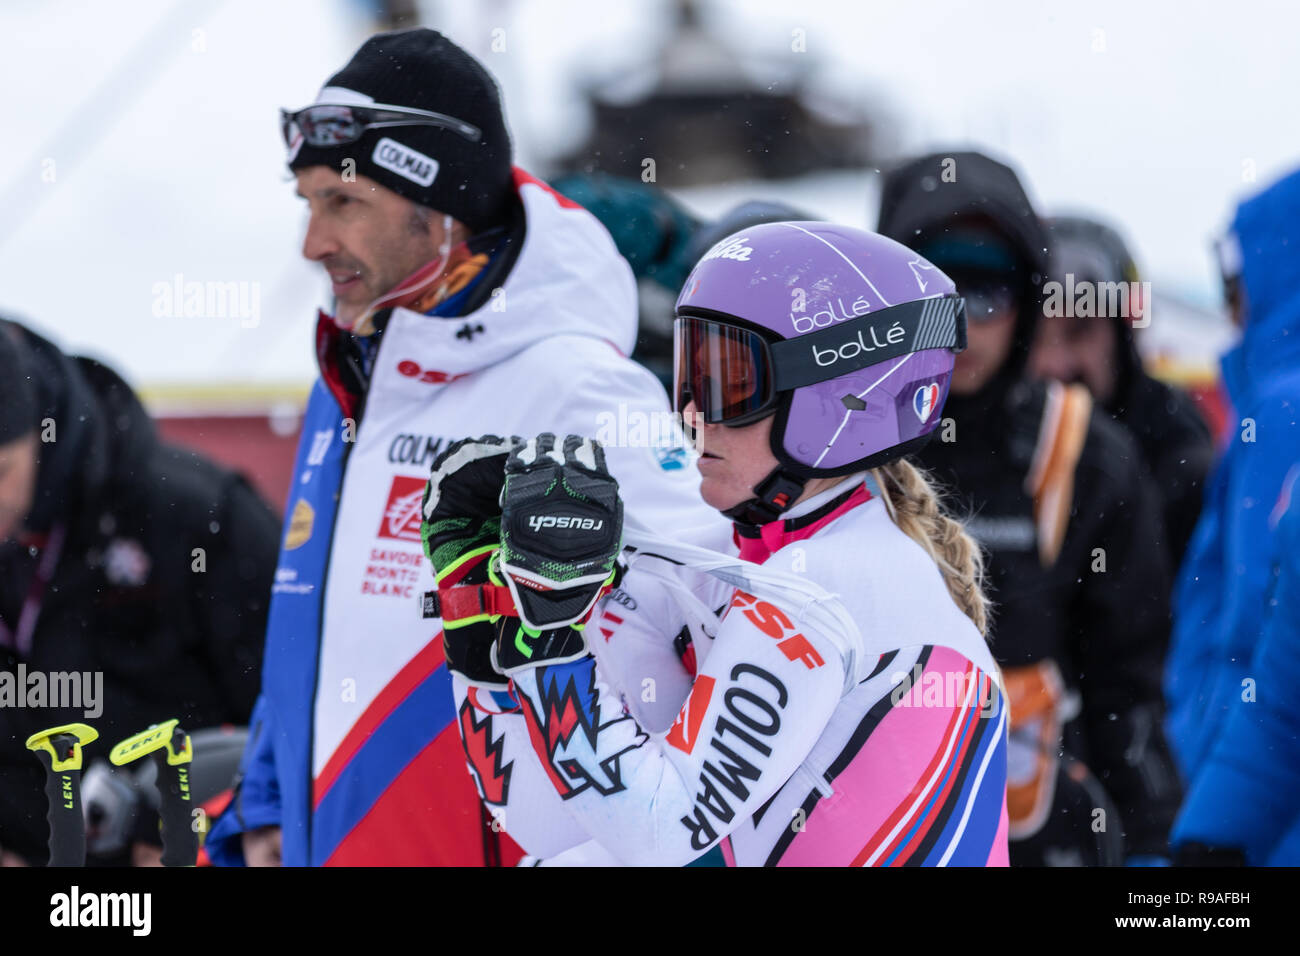 Courchevel, France. 21st December 2018, Courchevel, france. Tessa Worley third place on the podium in Courchevel Ski World Cup Women's Giant Slalom Credit: Fabrizio Malisan/Alamy Live News Stock Photo